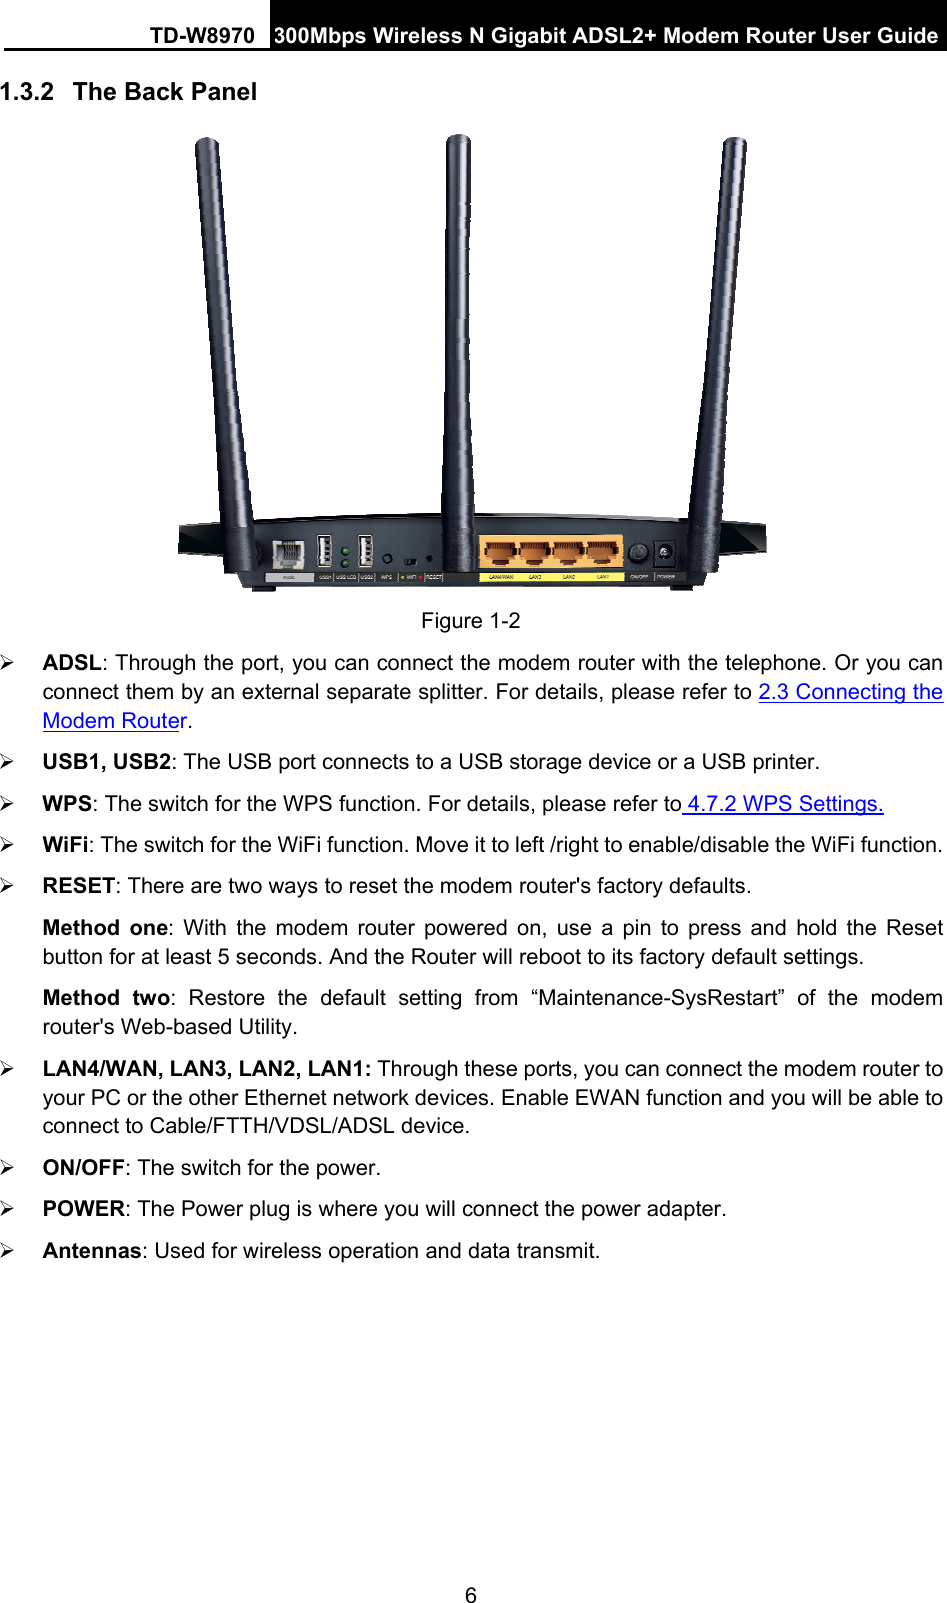 TD-W8970  300Mbps Wireless N Gigabit ADSL2+ Modem Router User Guide 6 1.3.2  The Back Panel  Figure 1-2 ¾ ADSL: Through the port, you can connect the modem router with the telephone. Or you can connect them by an external separate splitter. For details, please refer to 2.3 Connecting the Modem Router.  ¾ USB1, USB2: The USB port connects to a USB storage device or a USB printer. ¾ WPS: The switch for the WPS function. For details, please refer to 4.7.2 WPS Settings. ¾ WiFi: The switch for the WiFi function. Move it to left /right to enable/disable the WiFi function. ¾ RESET: There are two ways to reset the modem router&apos;s factory defaults.   Method one: With the modem router powered on, use a pin to press and hold the Reset button for at least 5 seconds. And the Router will reboot to its factory default settings. Method two: Restore the default setting from “Maintenance-SysRestart” of the modem router&apos;s Web-based Utility. ¾ LAN4/WAN, LAN3, LAN2, LAN1: Through these ports, you can connect the modem router to your PC or the other Ethernet network devices. Enable EWAN function and you will be able to connect to Cable/FTTH/VDSL/ADSL device. ¾ ON/OFF: The switch for the power. ¾ POWER: The Power plug is where you will connect the power adapter. ¾ Antennas: Used for wireless operation and data transmit. 